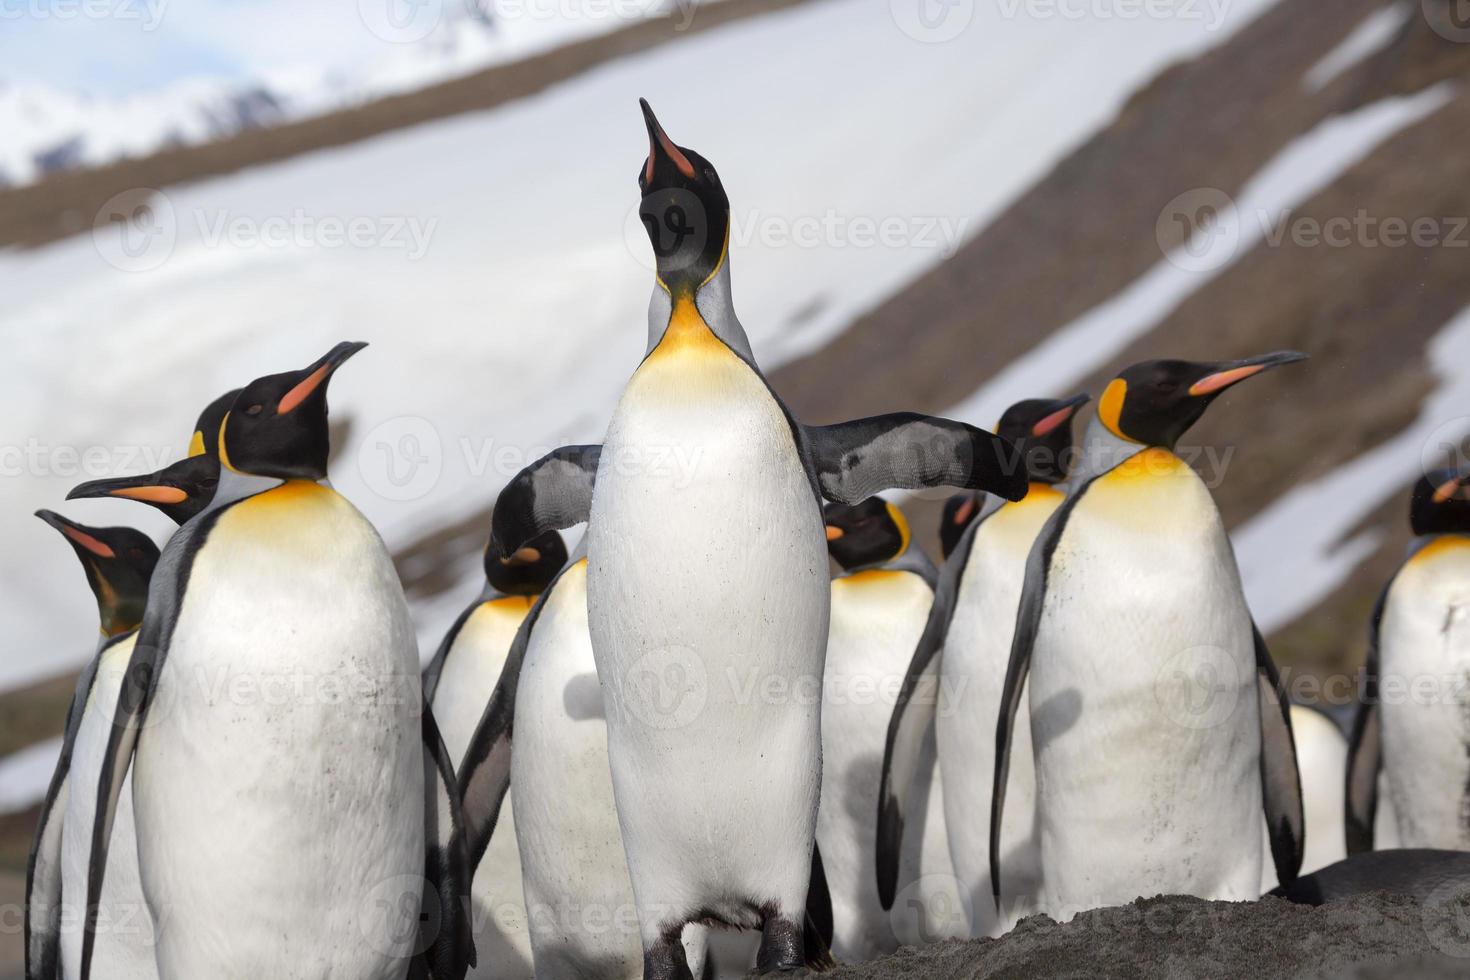 Looking up at a king penguin in Antarctica photo